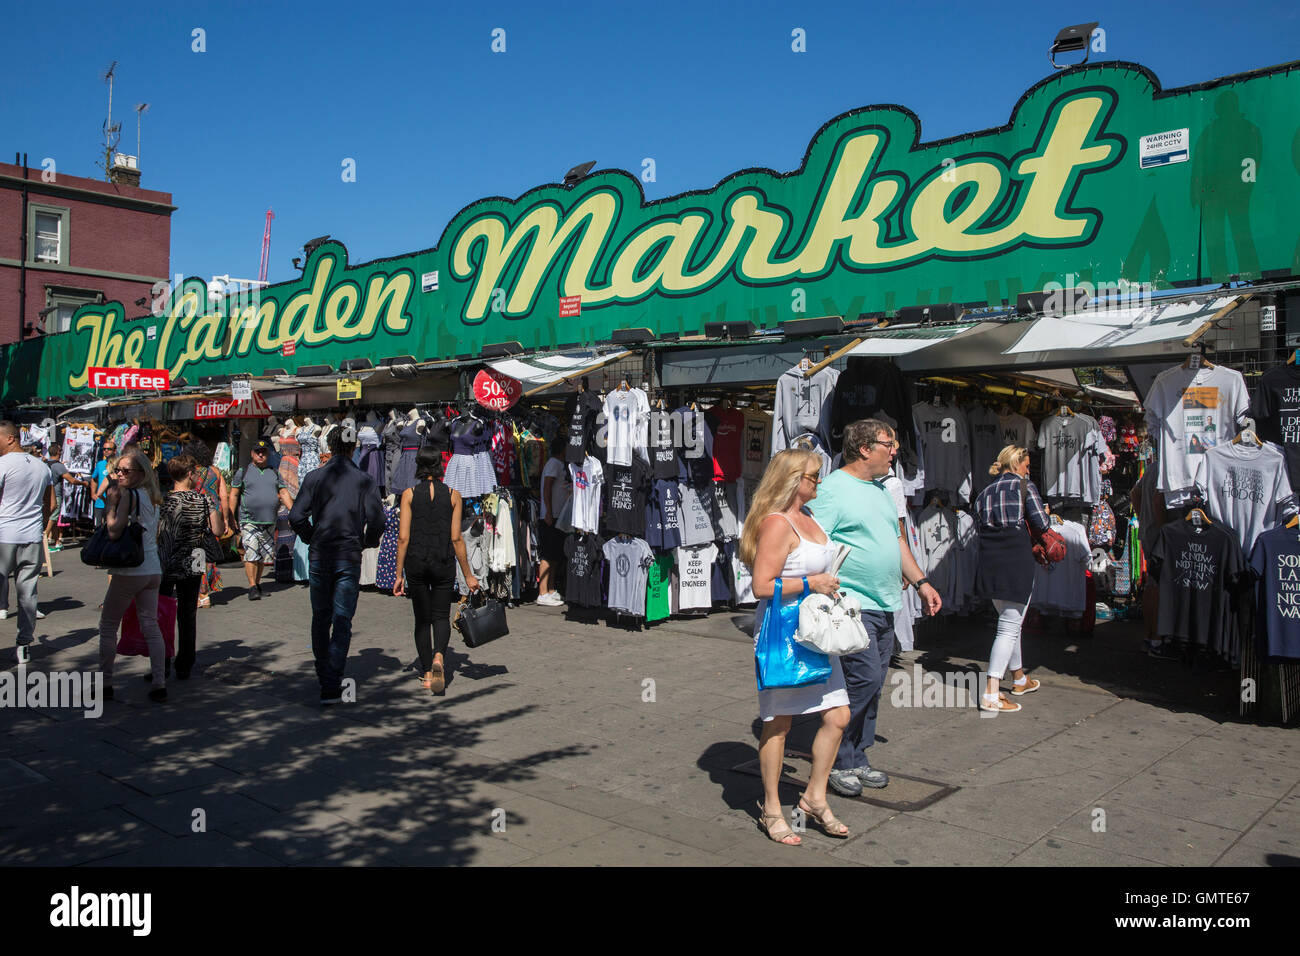 London, England. 26th August 2016. Shoppers at Camden Market, London. Stock Photo